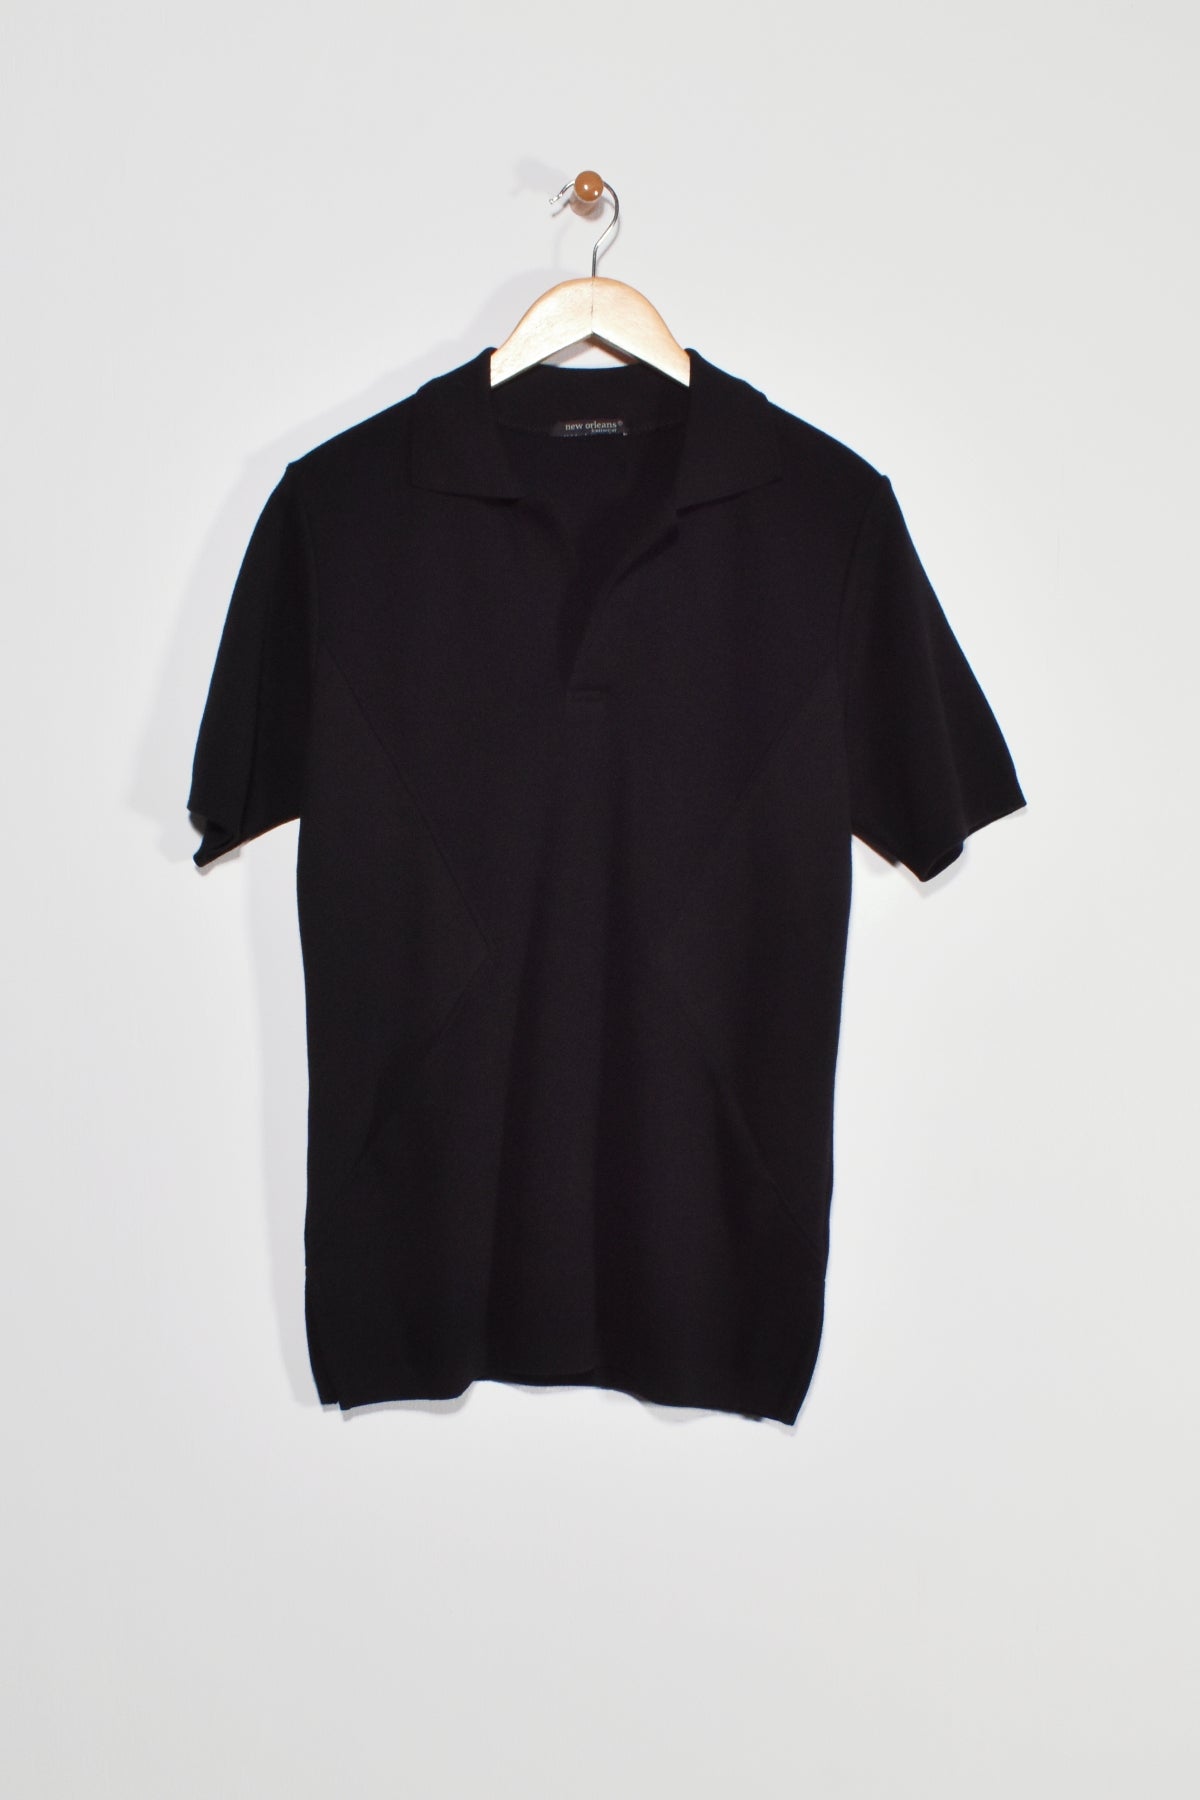 27” Short Sleeve Polo Top New Orleans Knitwear